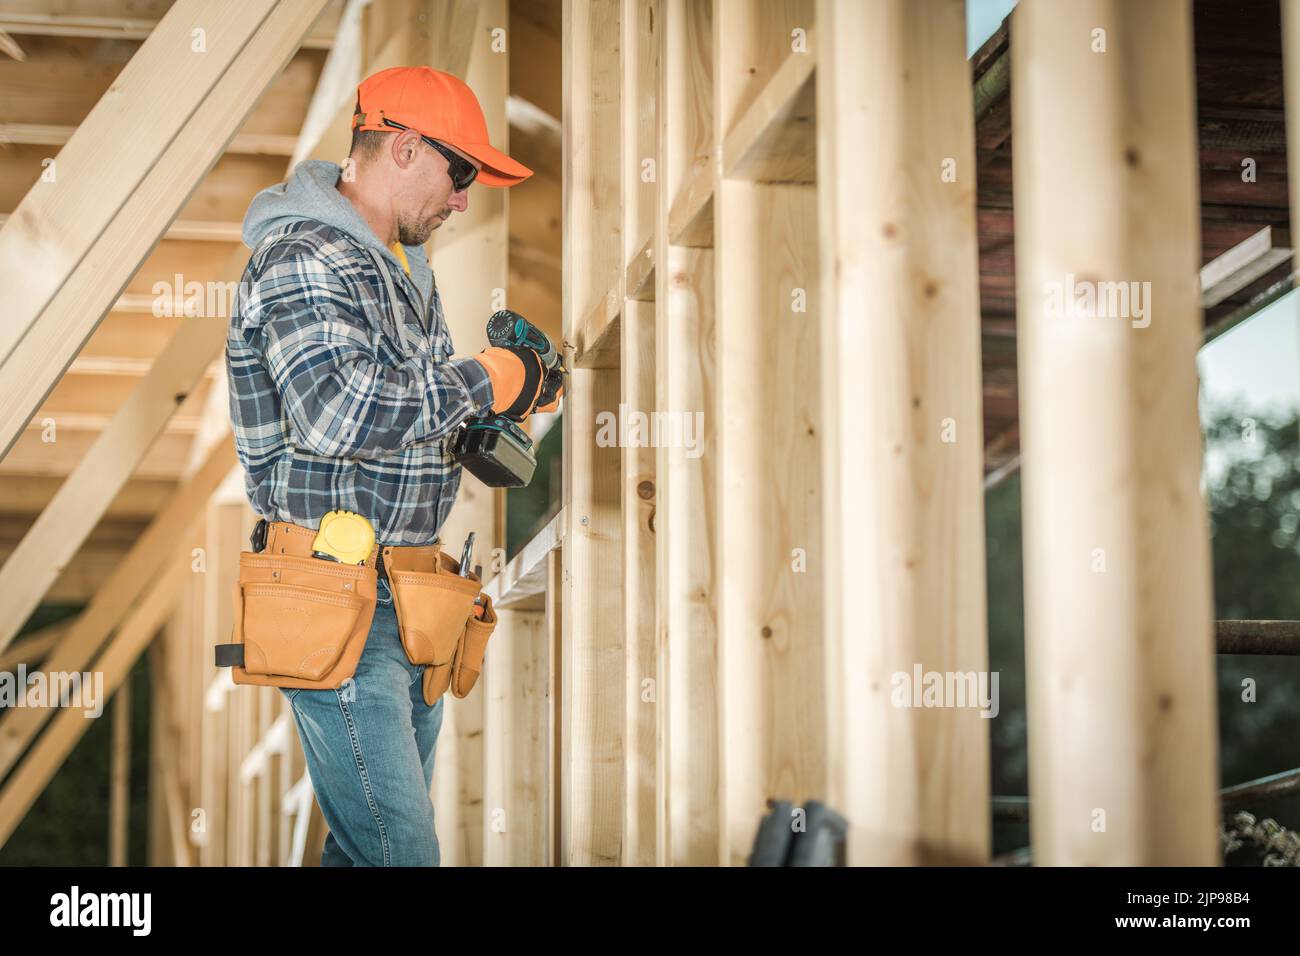 Caucasian Middle Aged Construction Worker Wearing Leather Tool Belt Holding Electric Screwdriver in His Hands Ready to Start Working on Wooden Skeleto Stock Photo